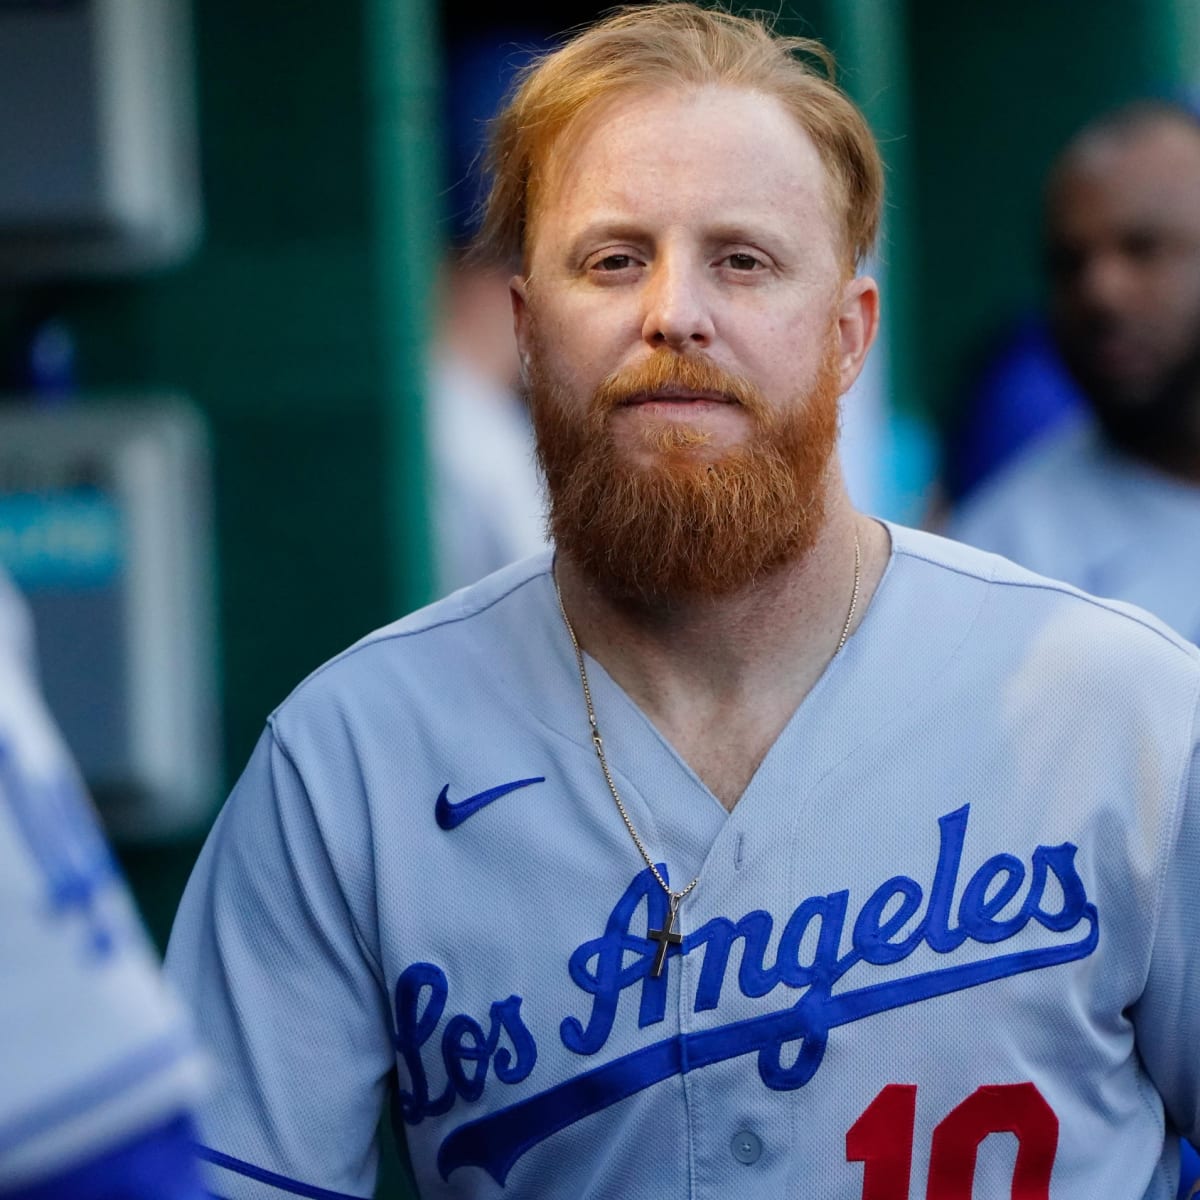 Justin Turner's Turnaround: From Mets Castoff to Dodgers Star